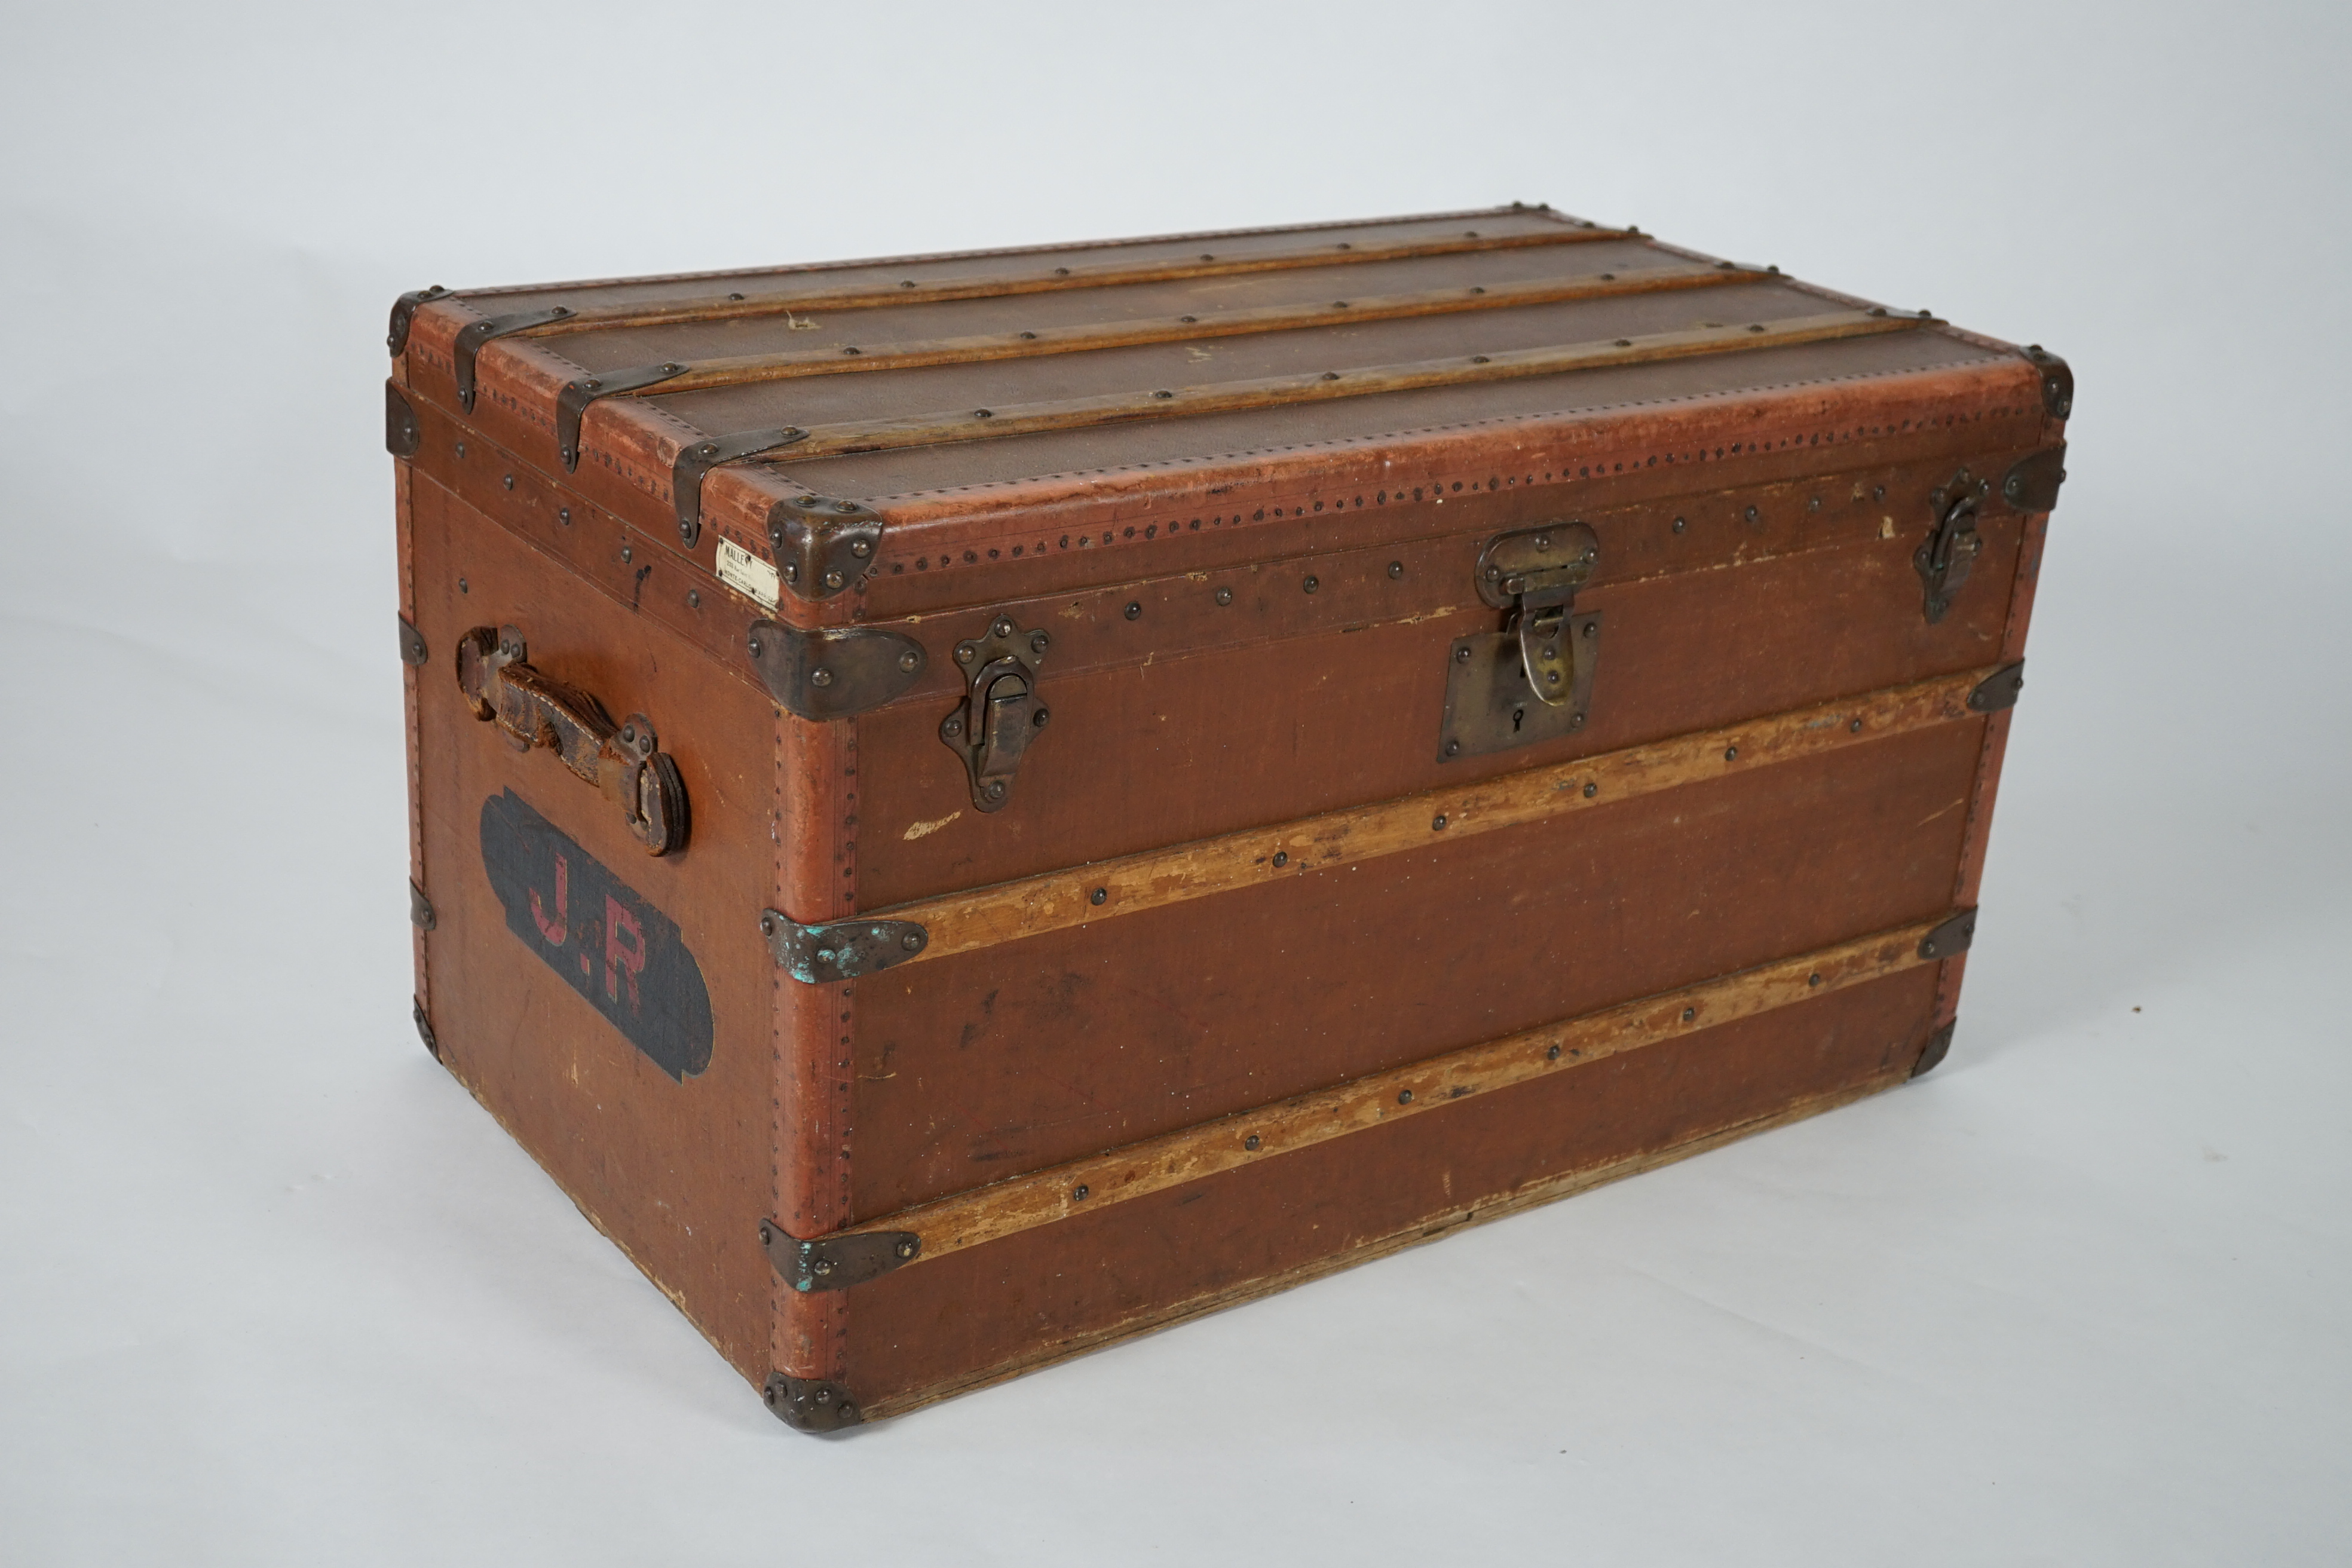 E. Goyard Aine, 233 Rue Saint Honore Paris, a late 19th or early 20th century canvas covered travelling trunk, brass mounted with ash batons, height 48cm, width 86cm, depth 49cm